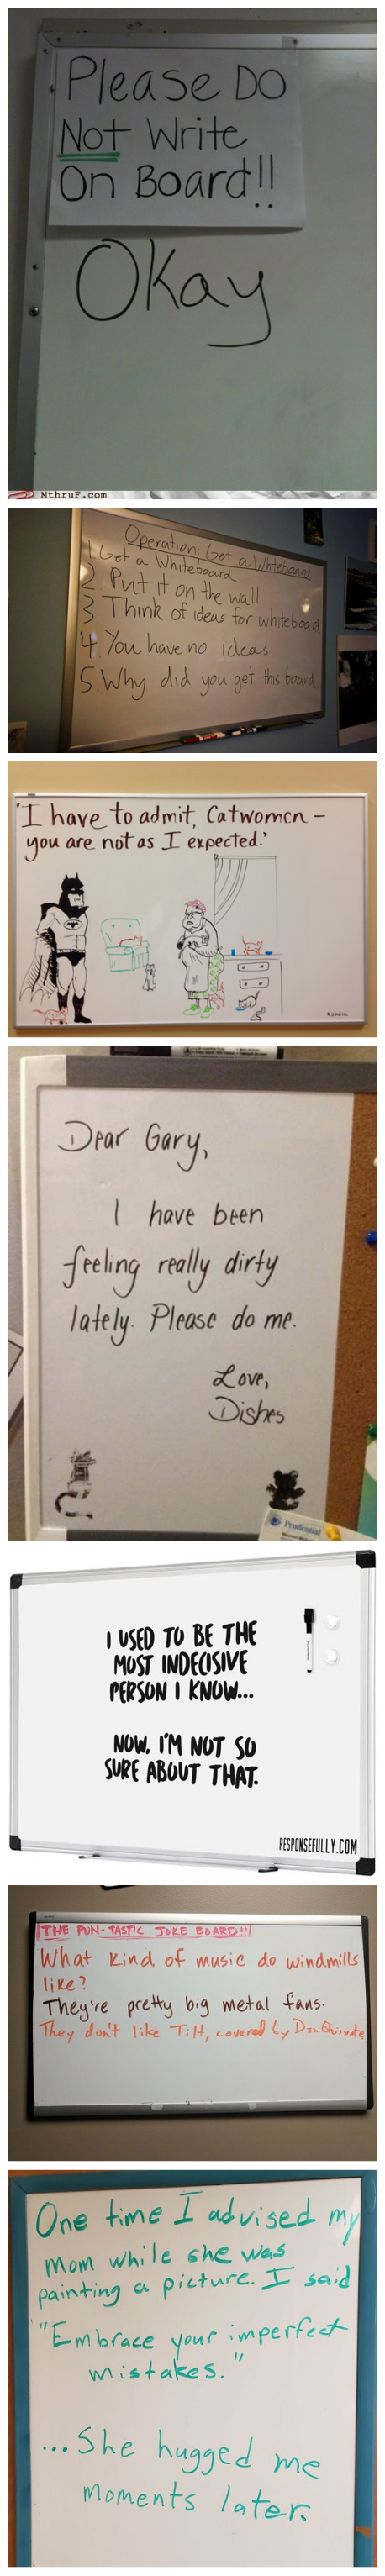 Amusing Whiteboards To Brighten Up Your Day